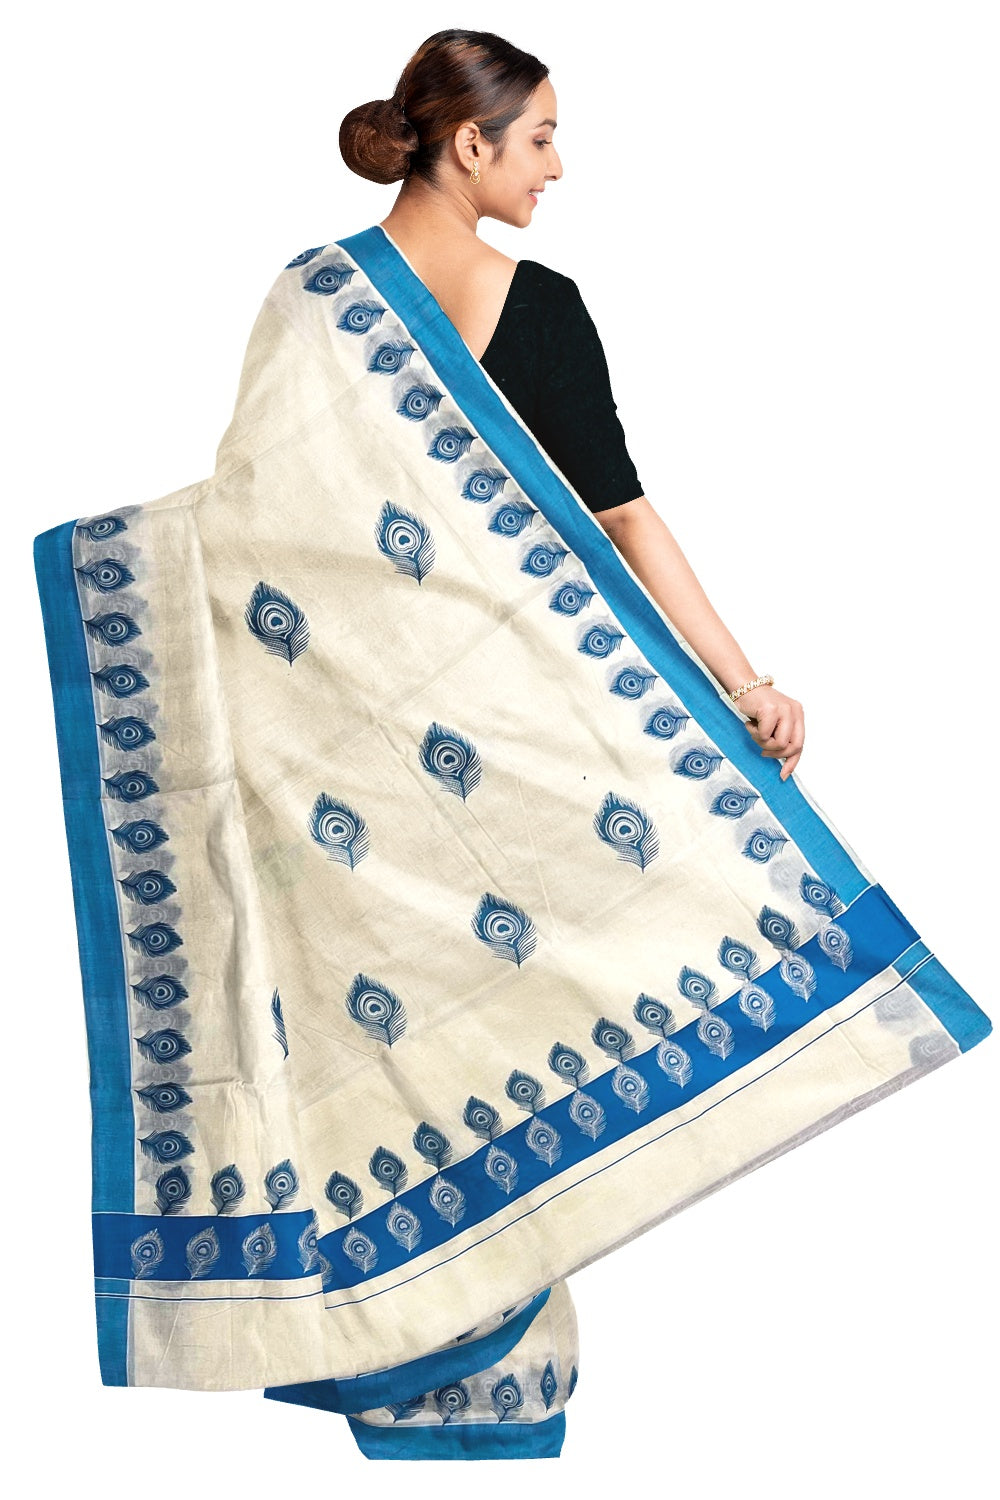 Off White Pure Cotton Kerala Saree with Peacock Feather Block Prints on Blue Border and Tassels on Pallu